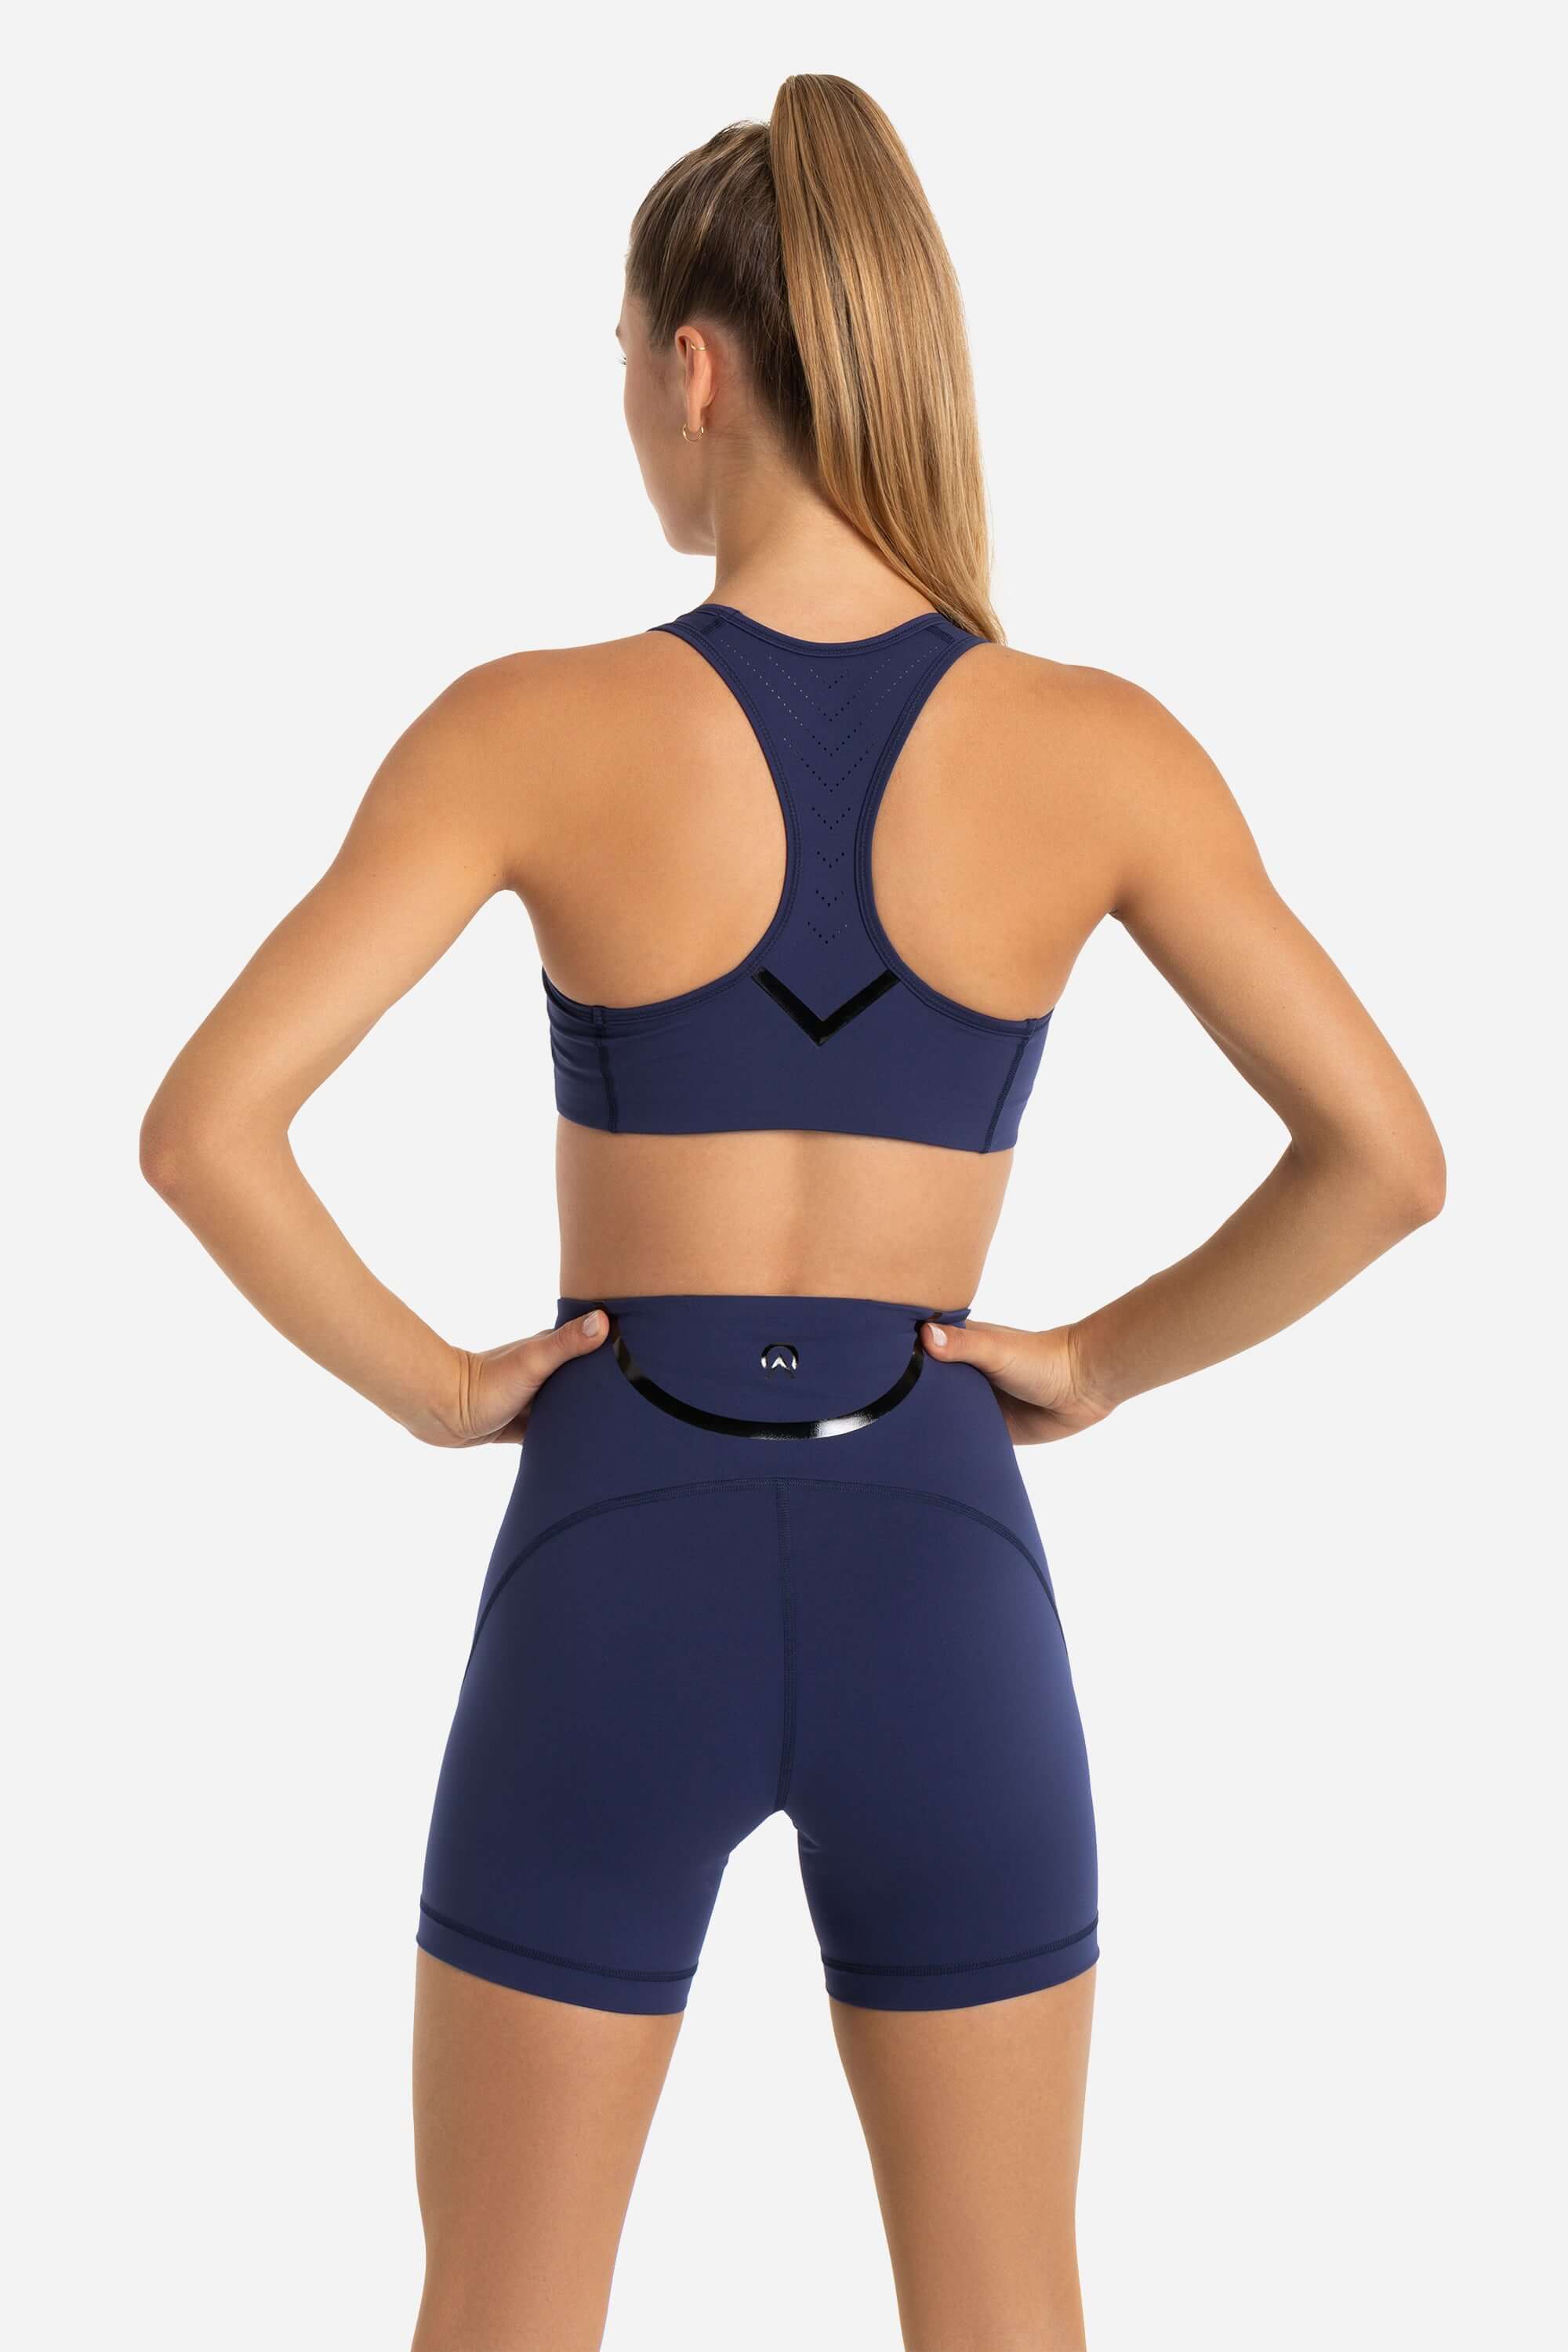 women in sports bra and short tights in blue 